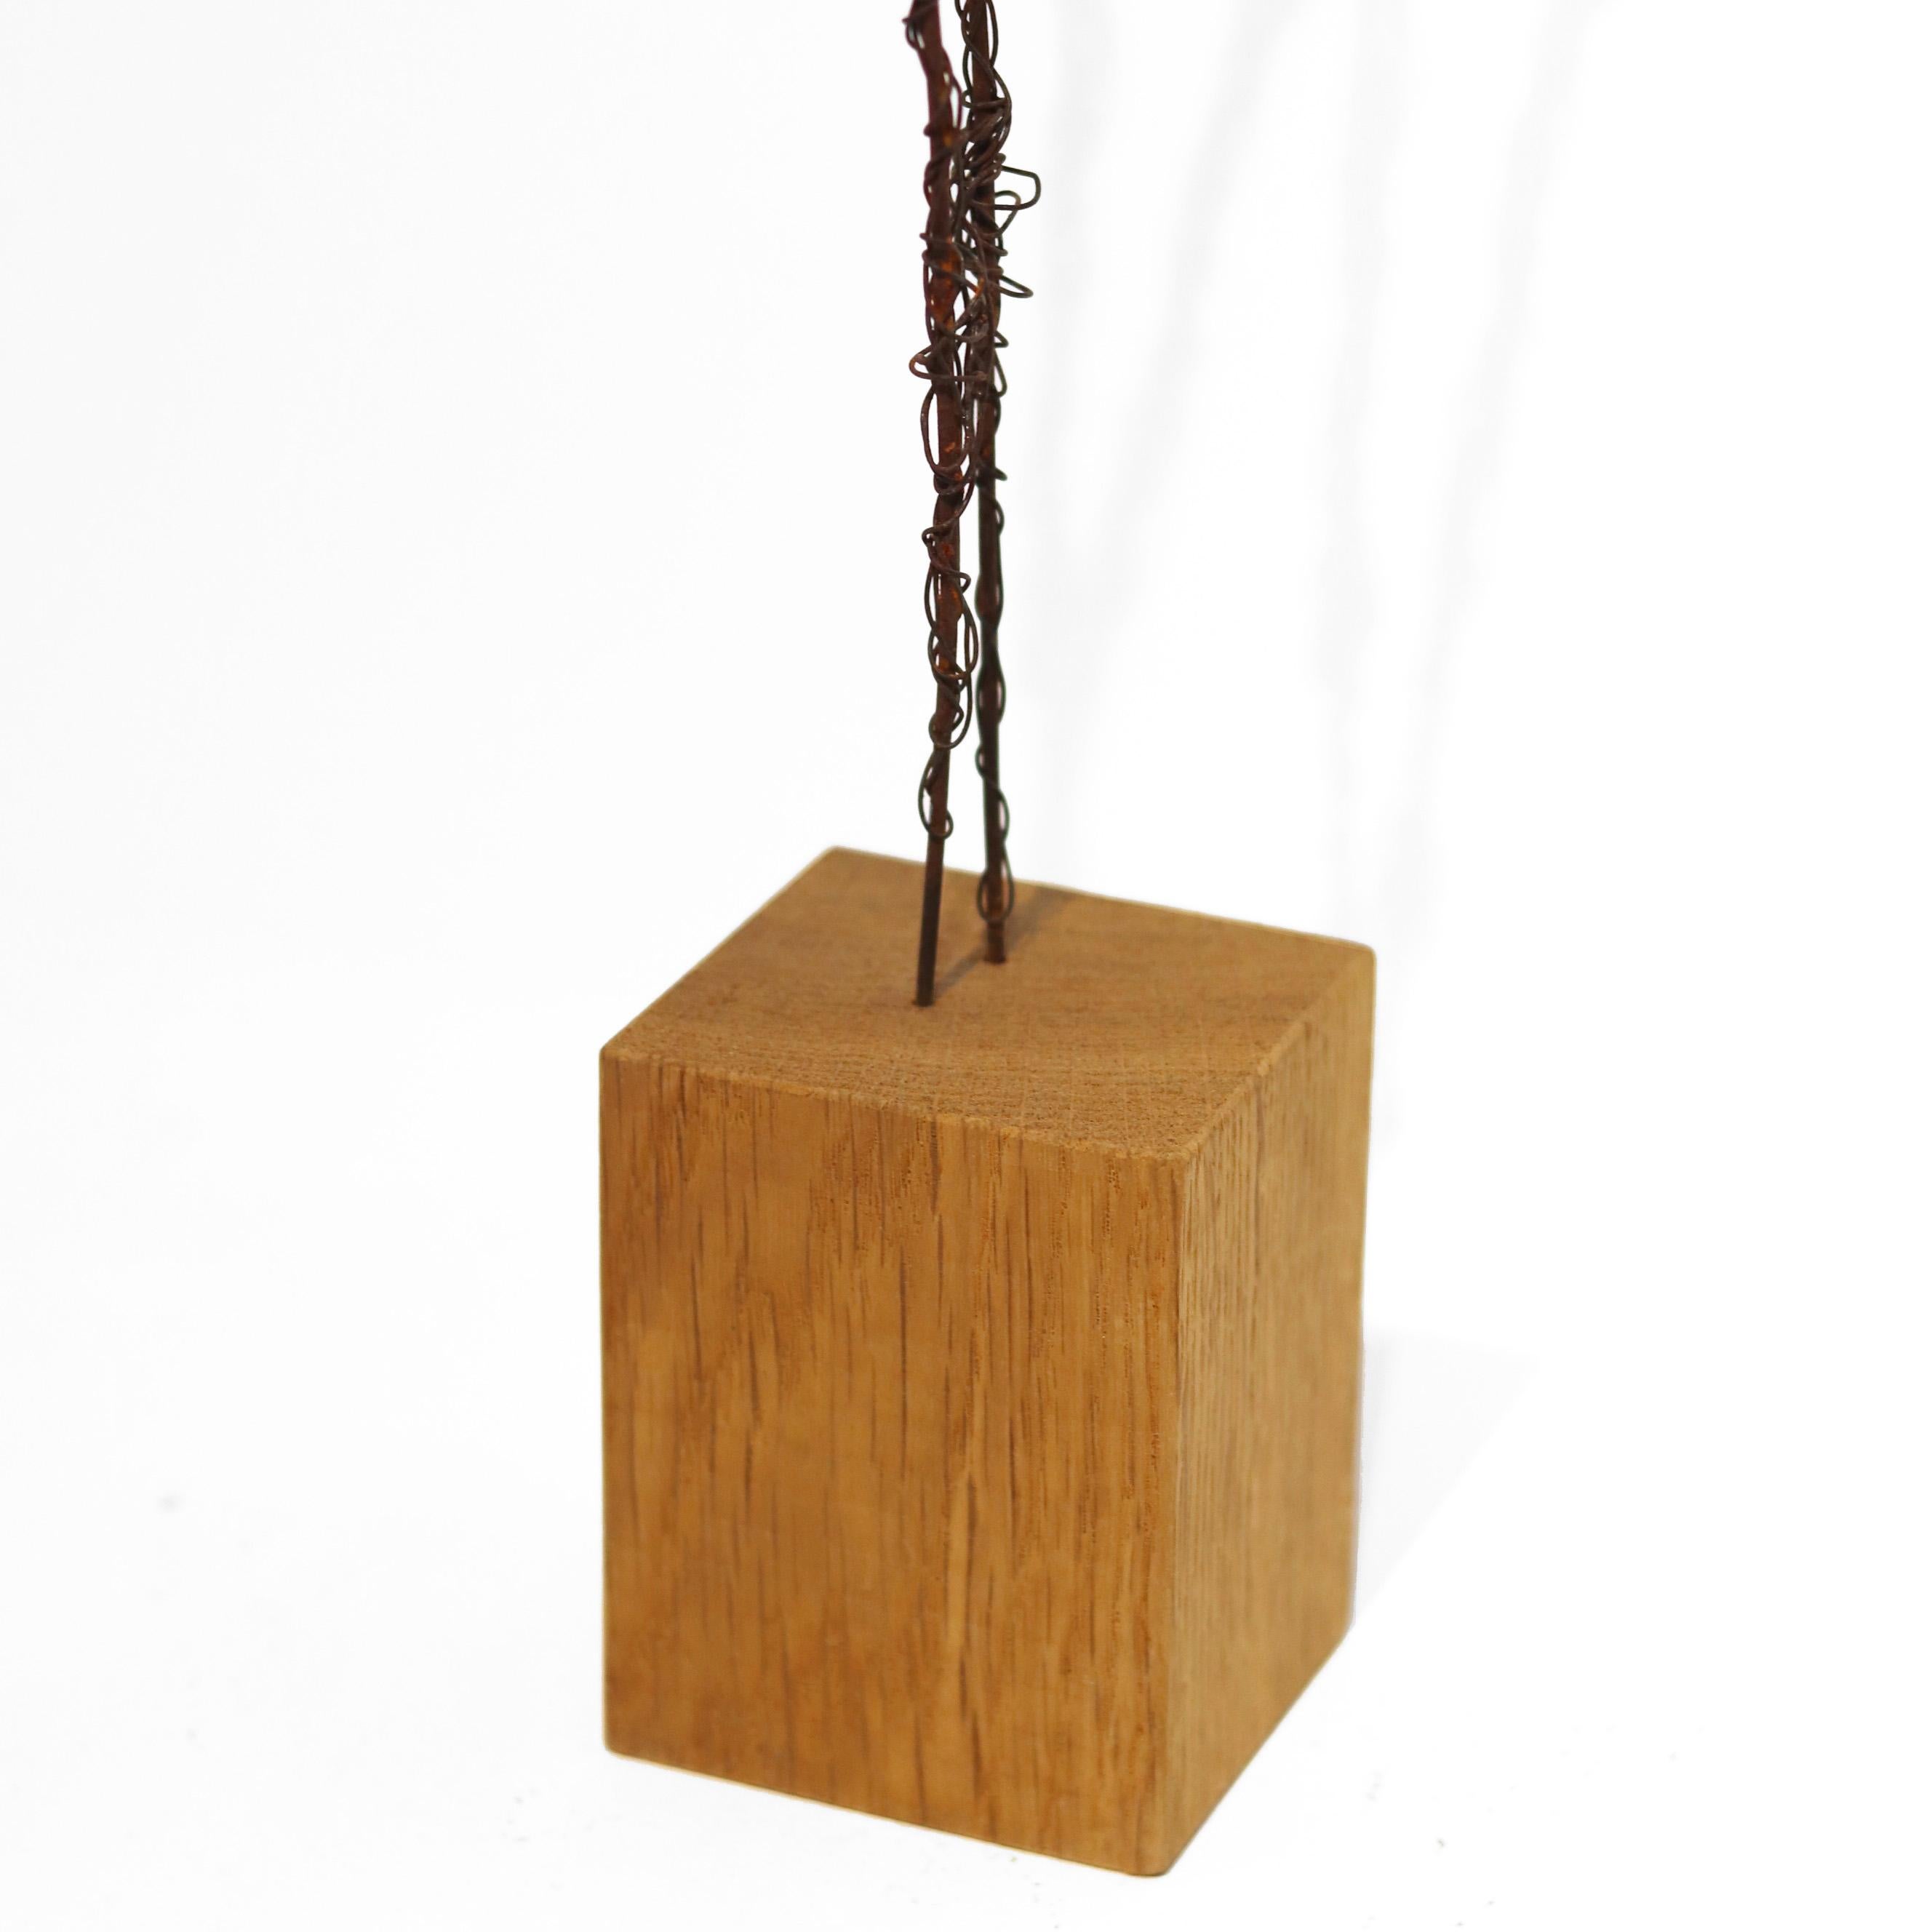 Susy Hunziker's metal figures are the result of exploring form, colors, and feelings, and reflect a love of life and aesthetics. Rust brown iron wire is wound meticulously in varying thicknesses, creating abstract sculptural figures. Her work is